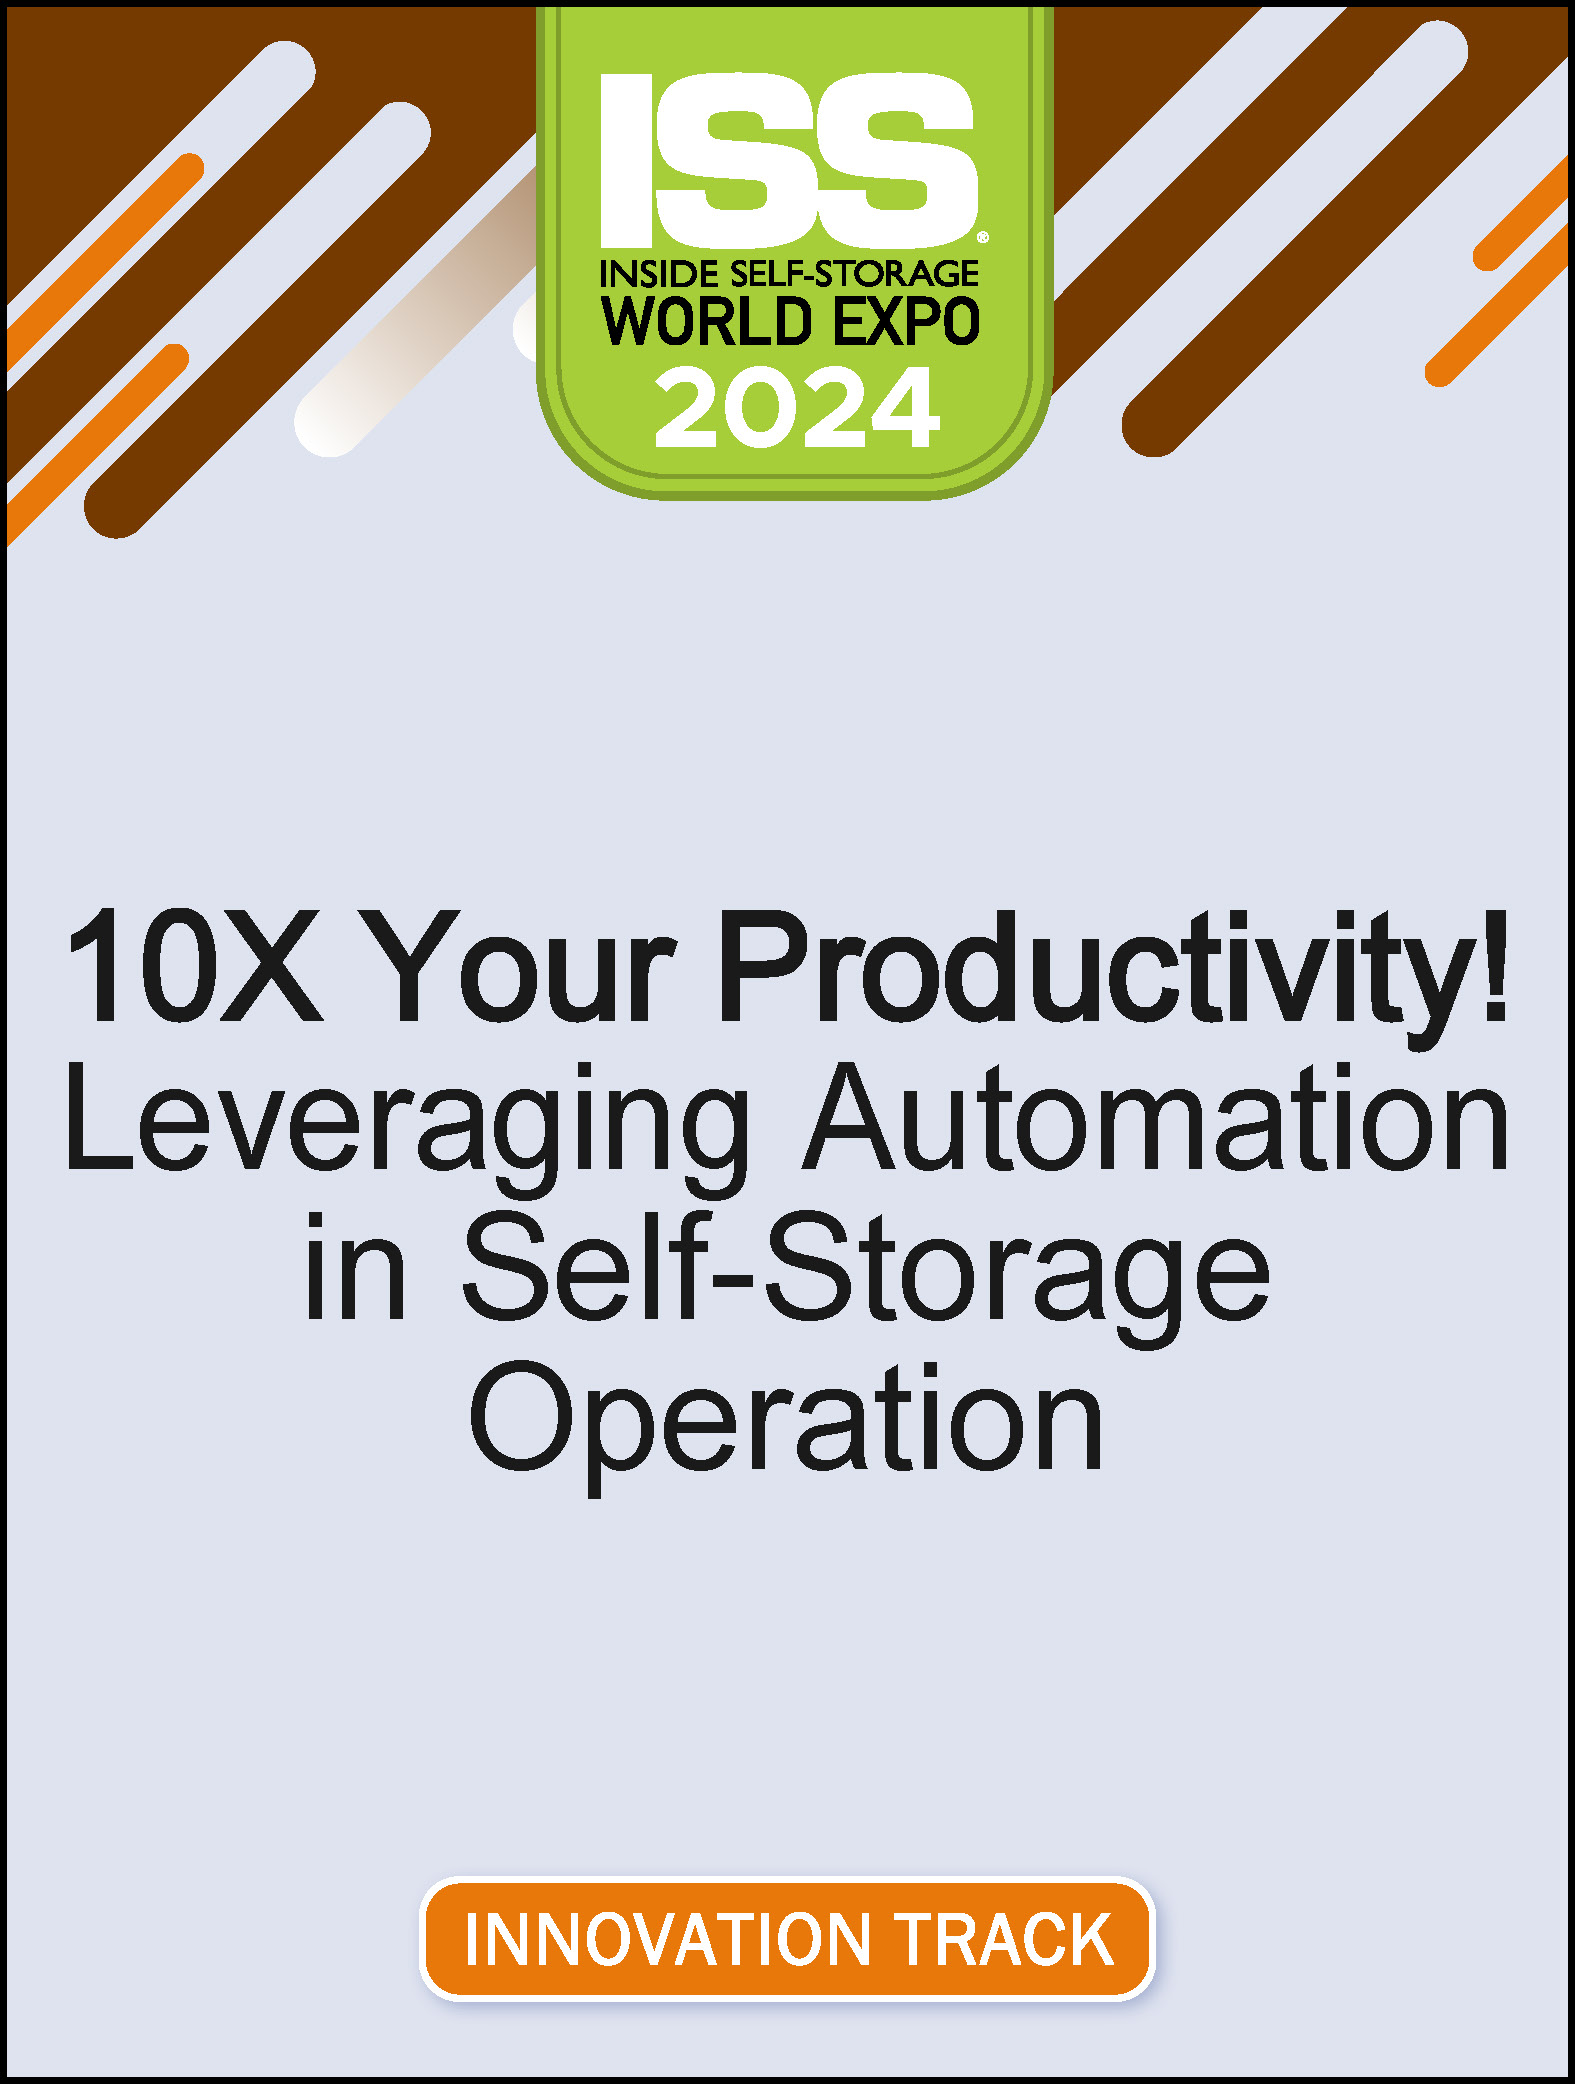 Video Pre-Order Sub - 10X Your Productivity! Leveraging Automation in Self-Storage Operation